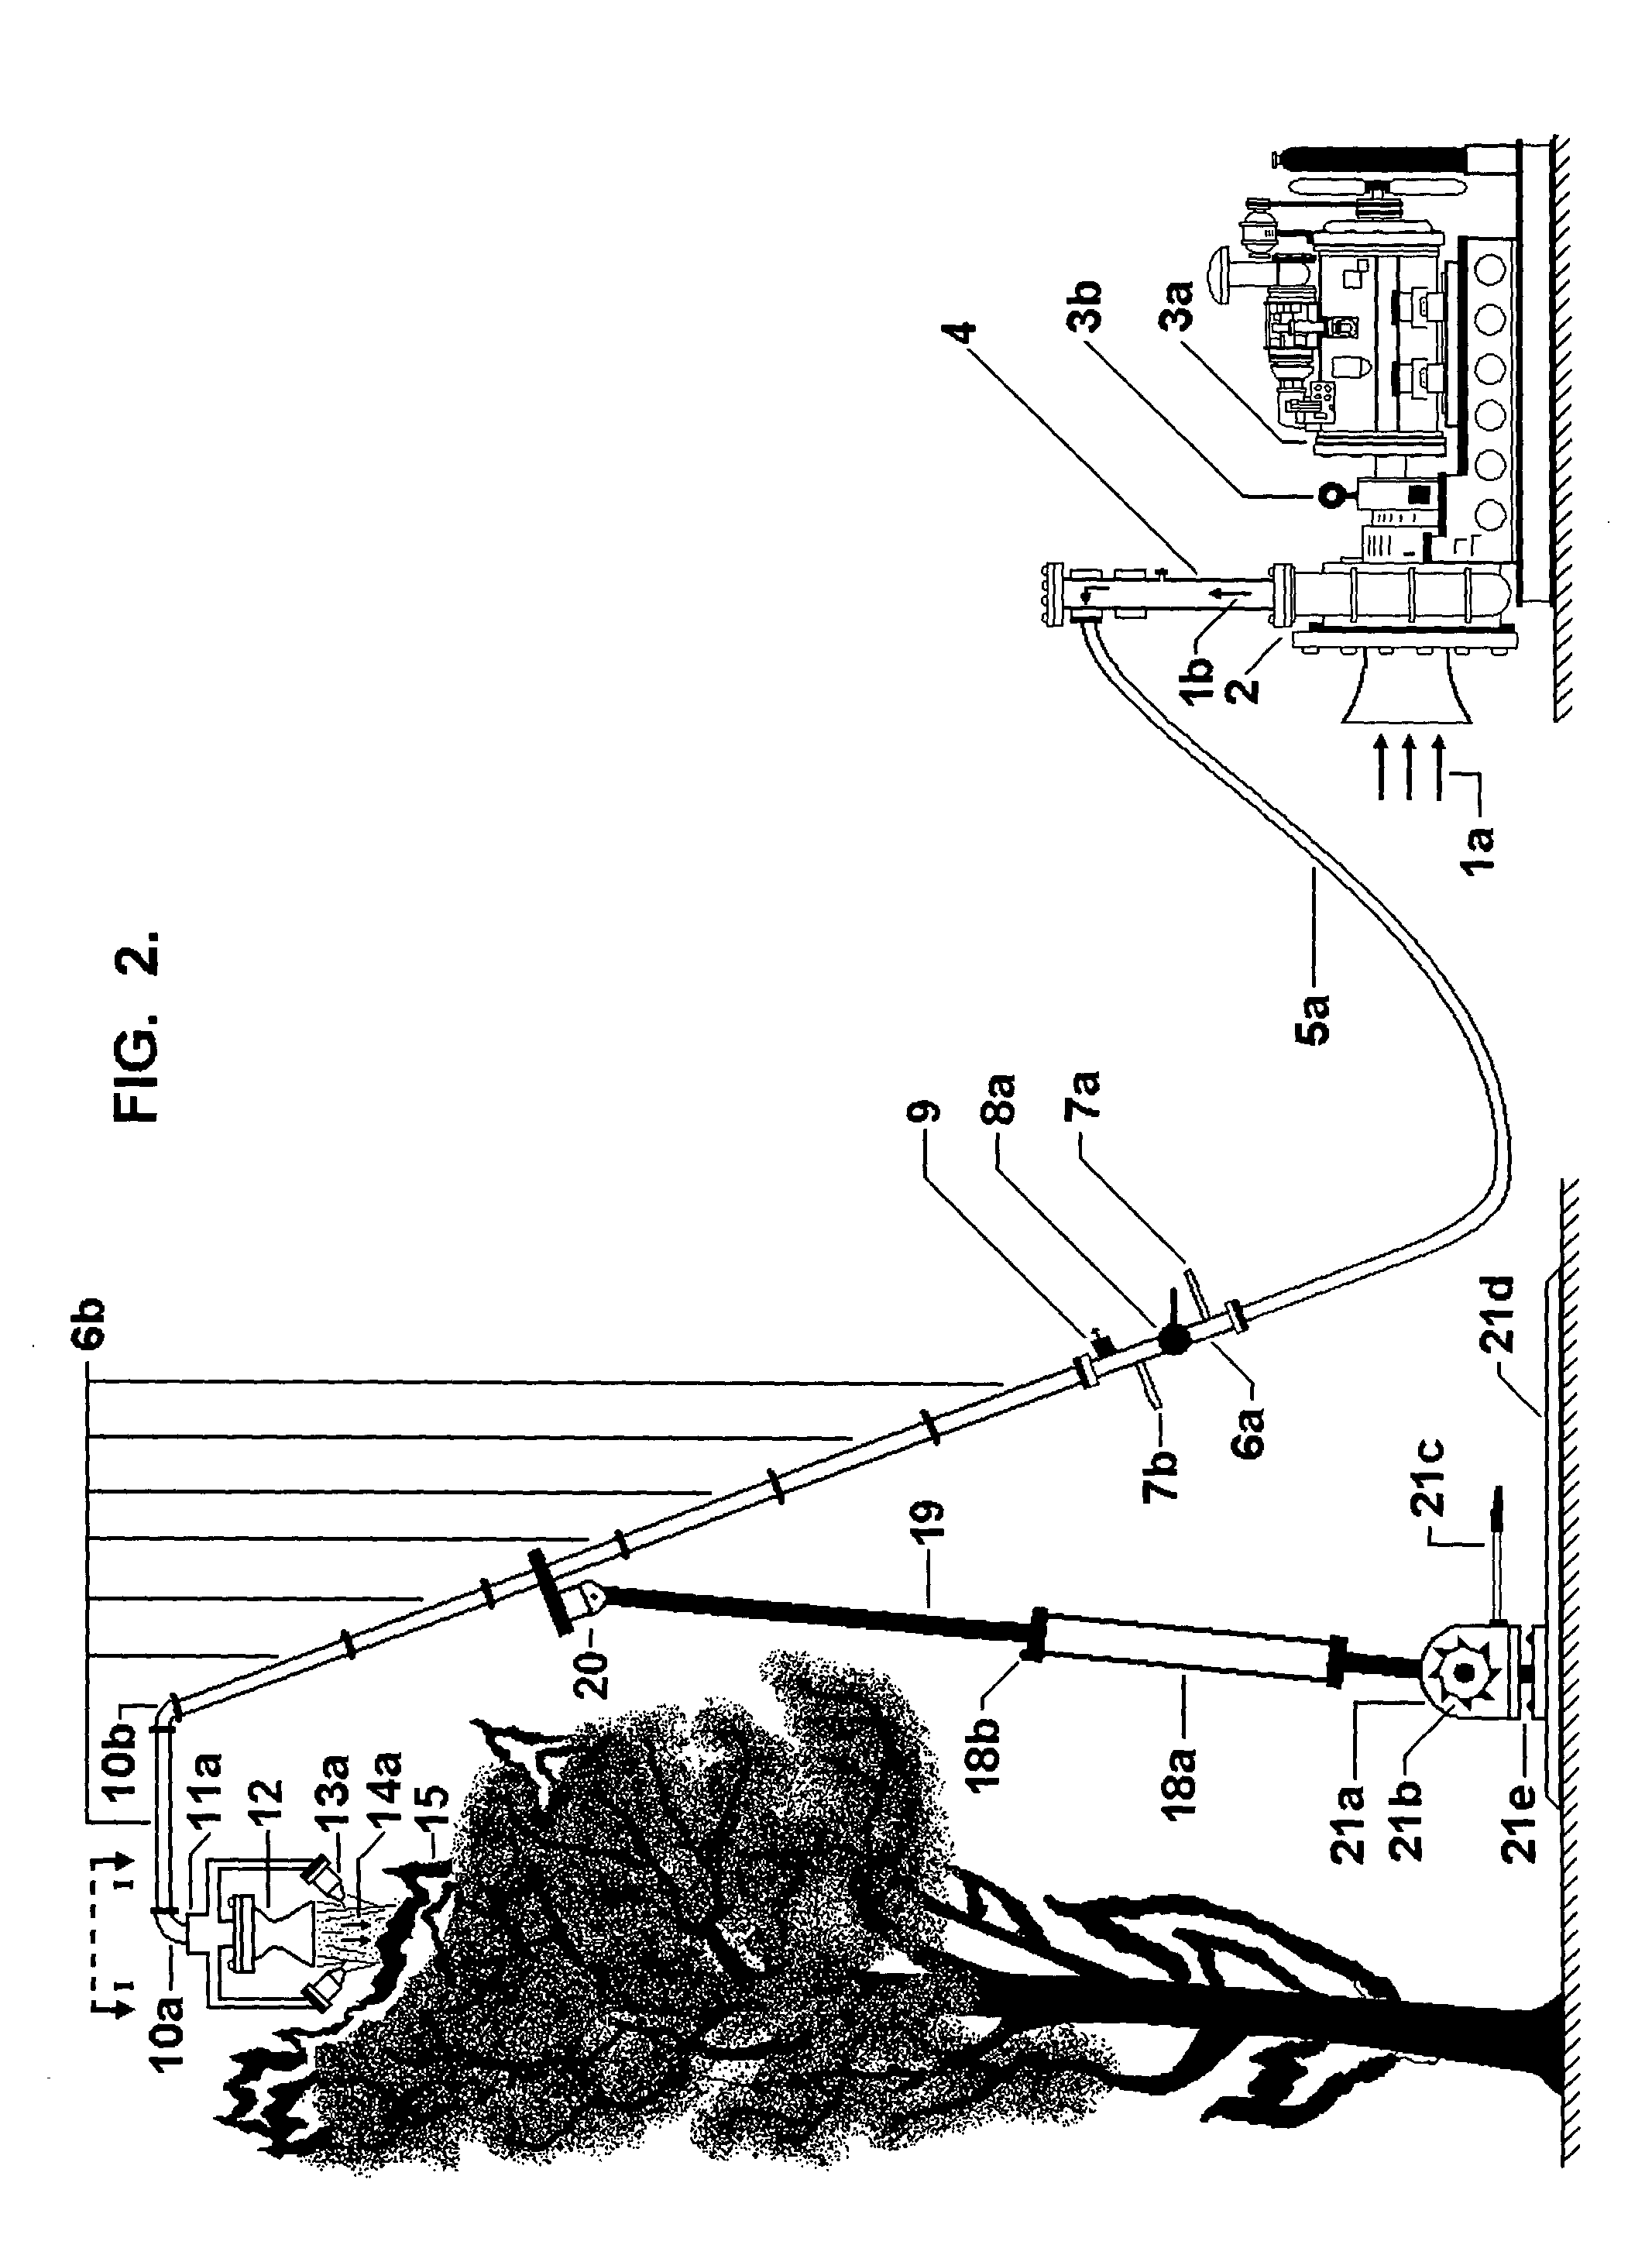 Ambient-air jet blast flames containment and suppression system